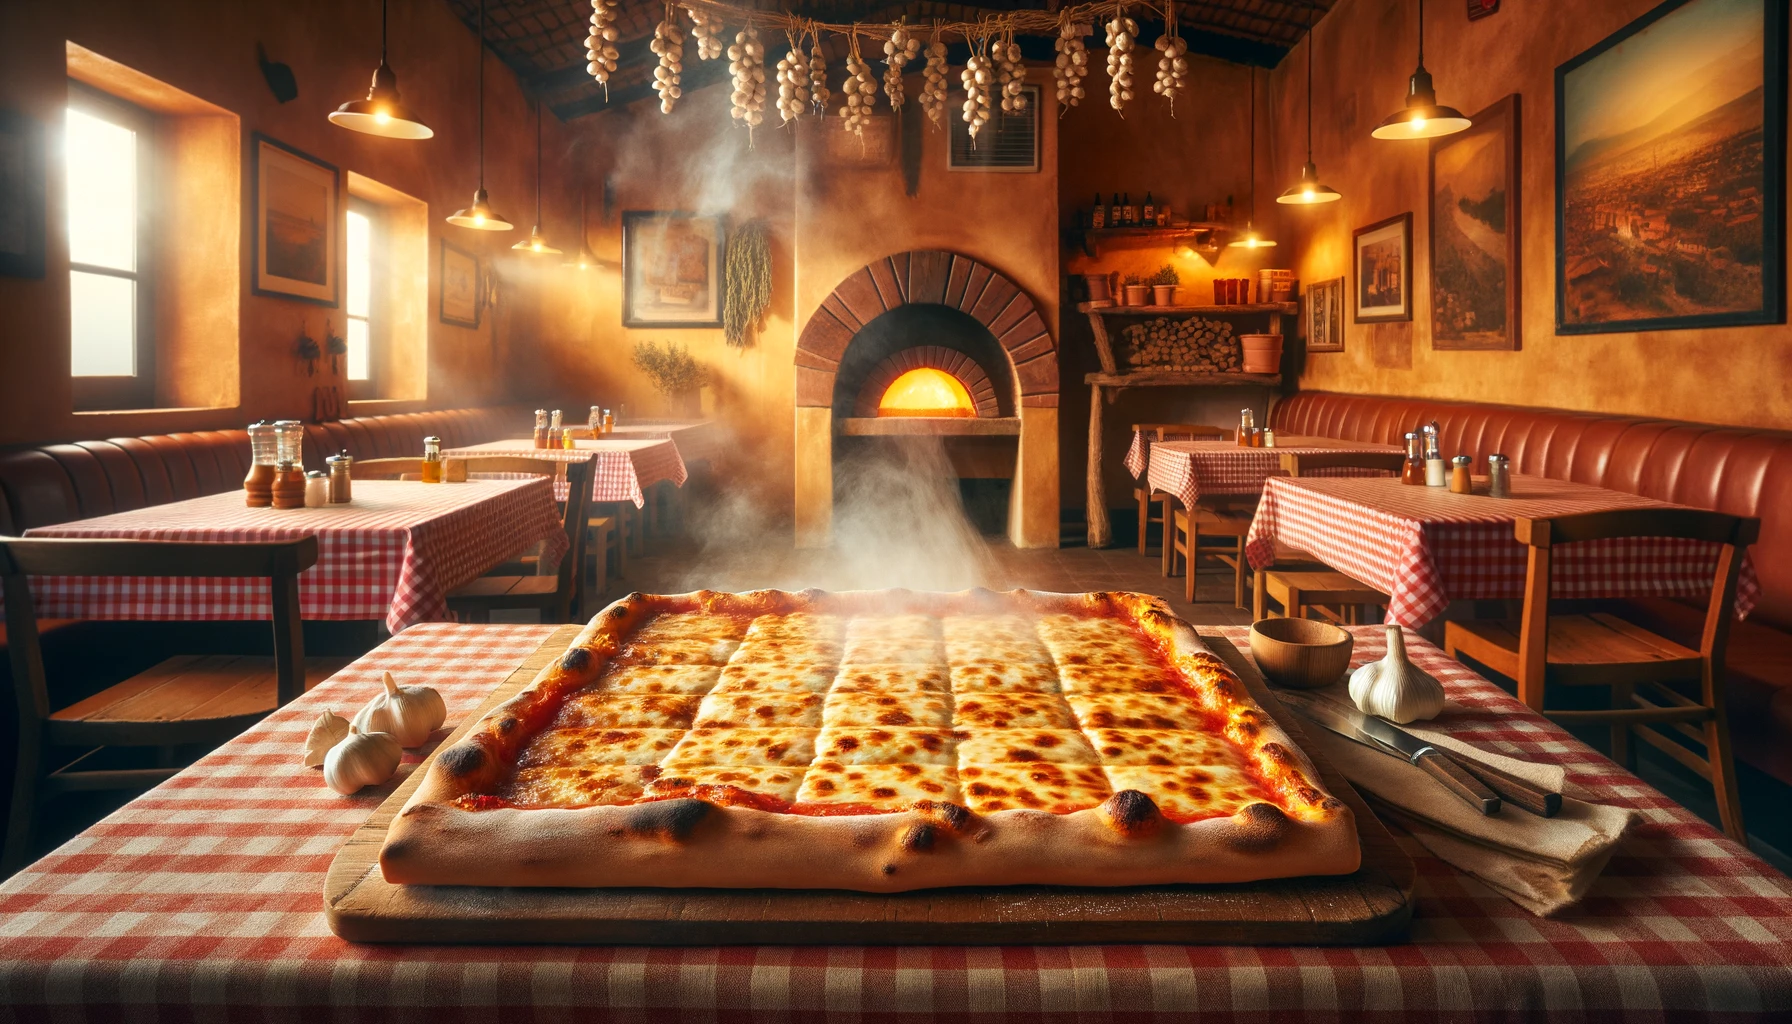 photo of an old forge-style pizza in an Italian dining room with a wood-fired oven